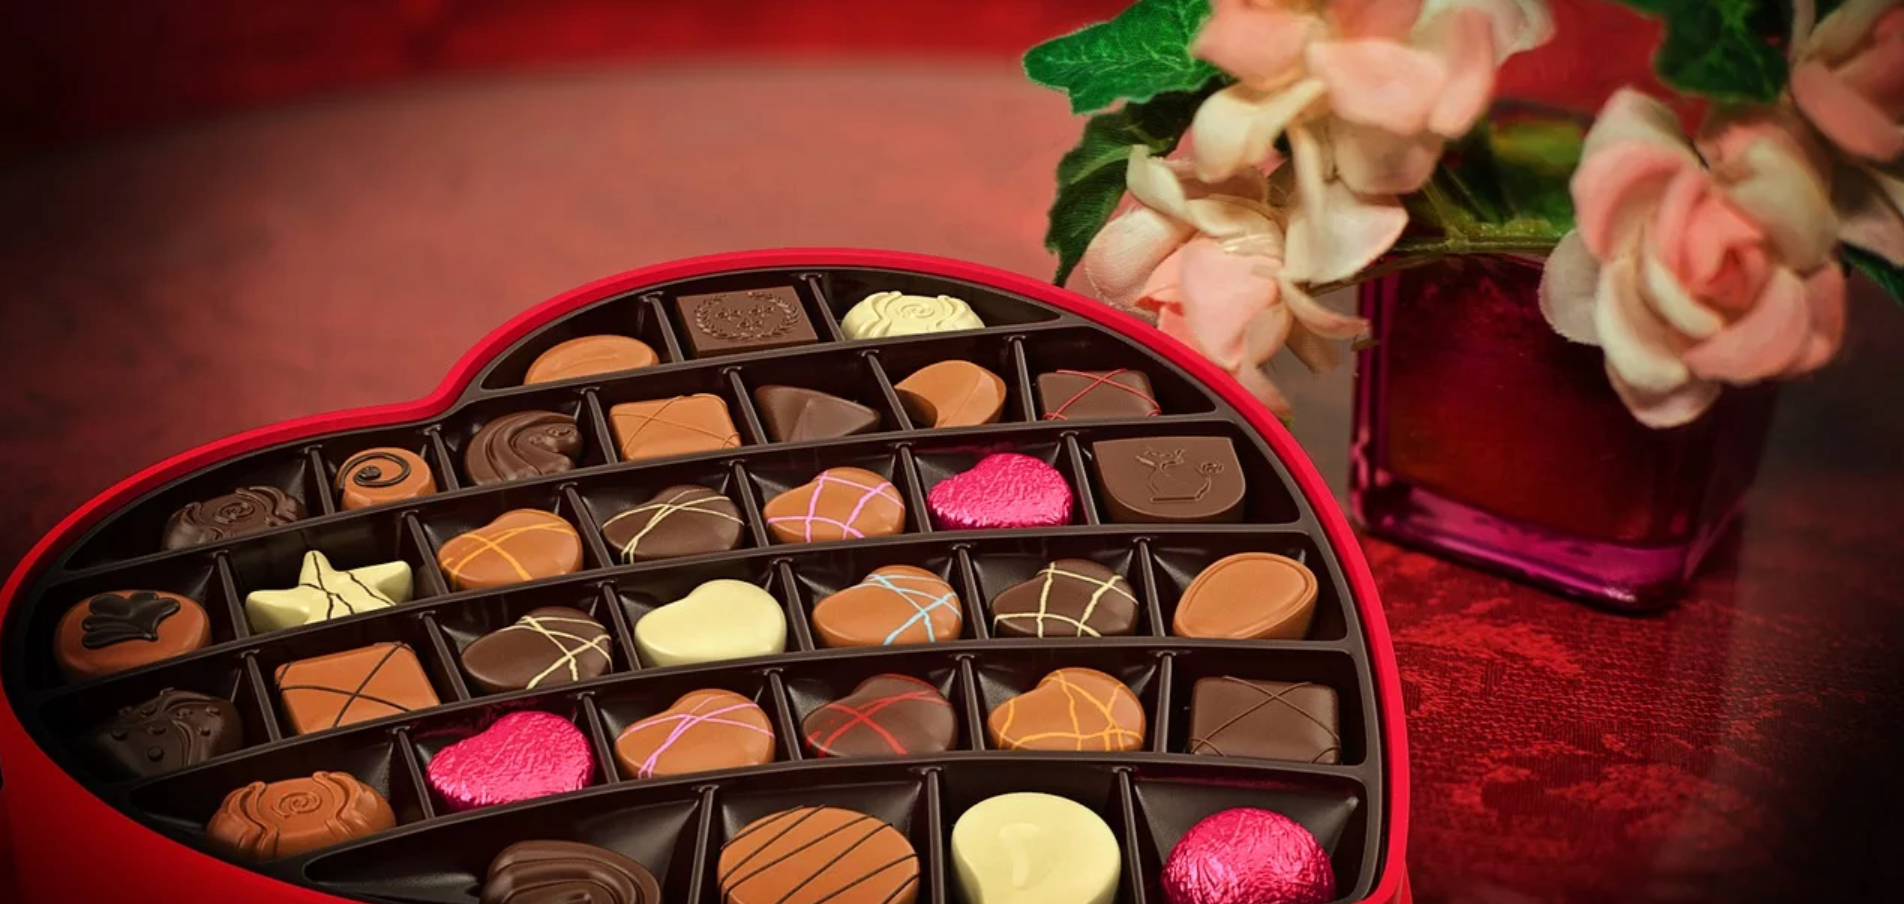 Chocolates come in many varities-what's your favorite?